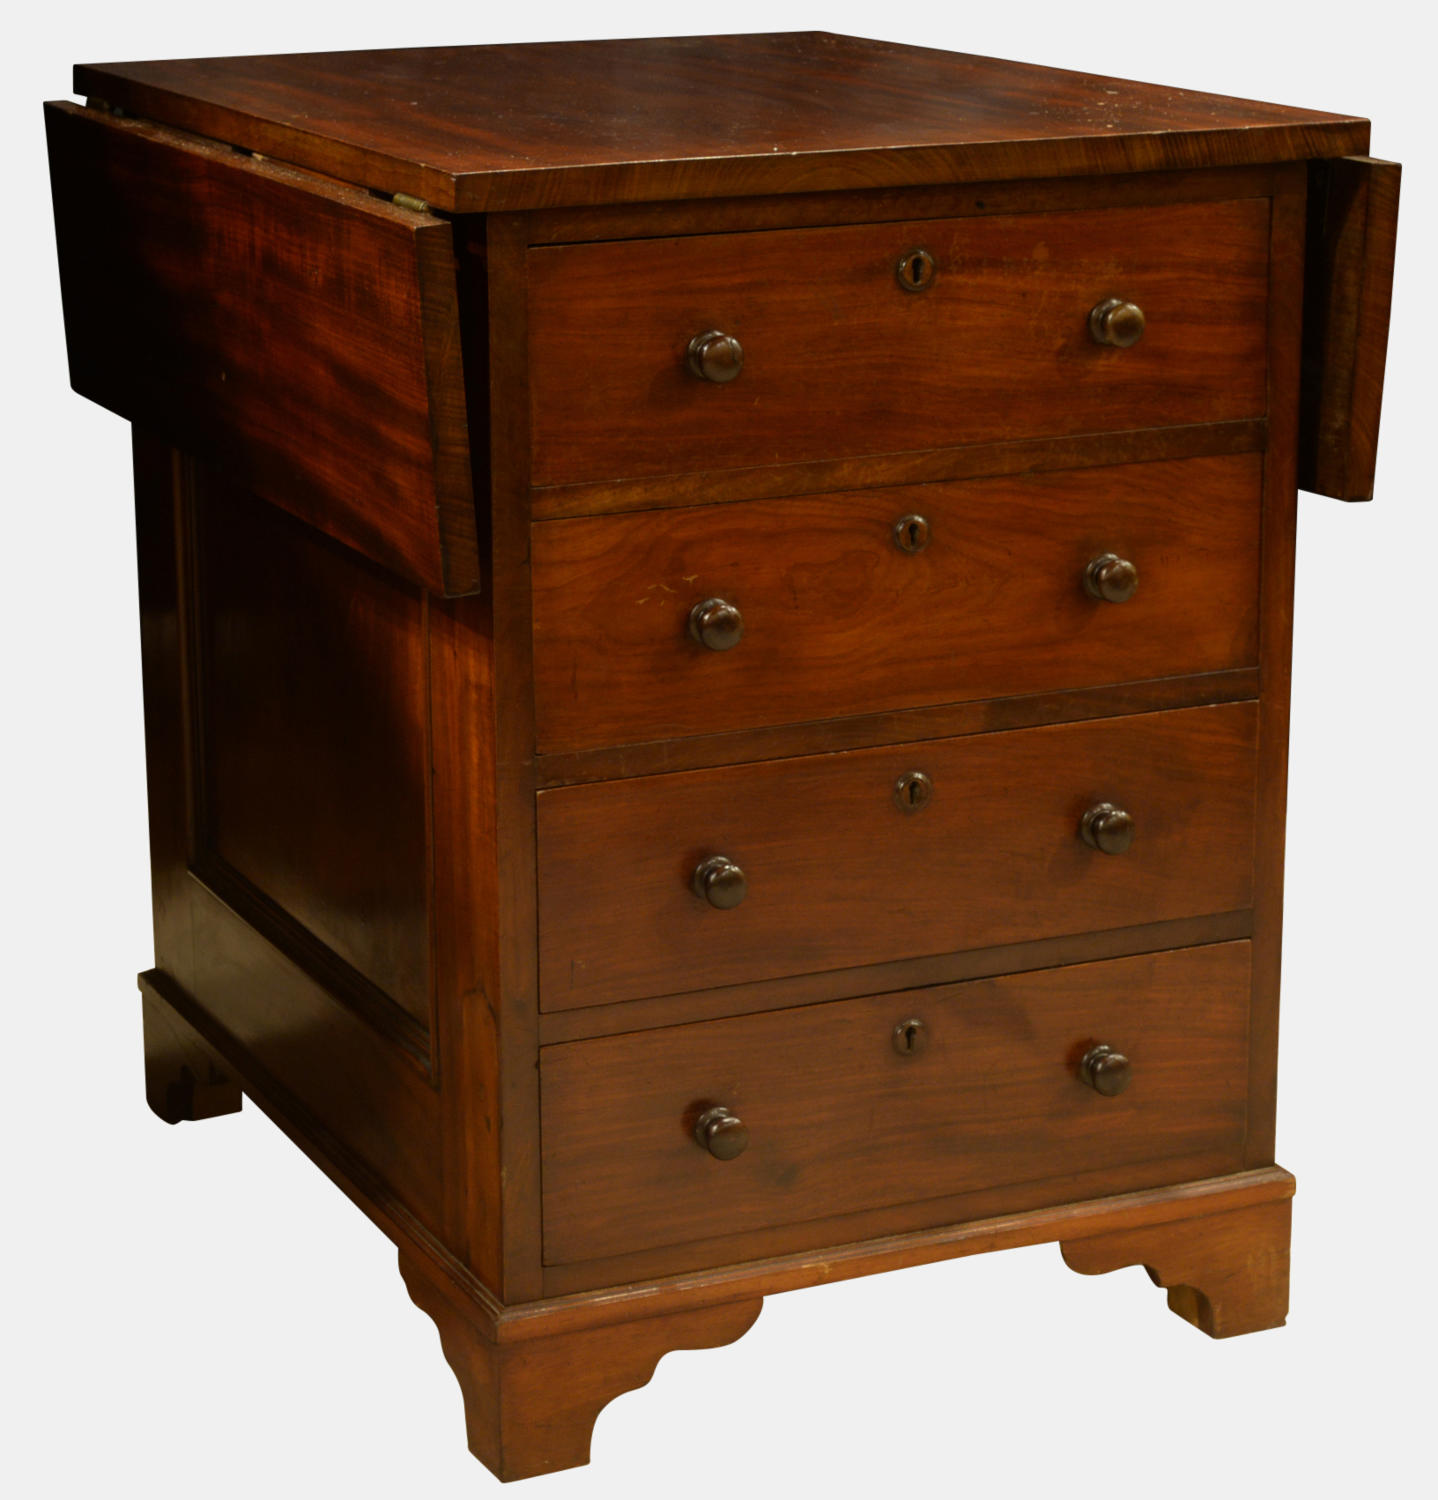 19th Century Drop Flap Mahogany Table Chest of Drawers